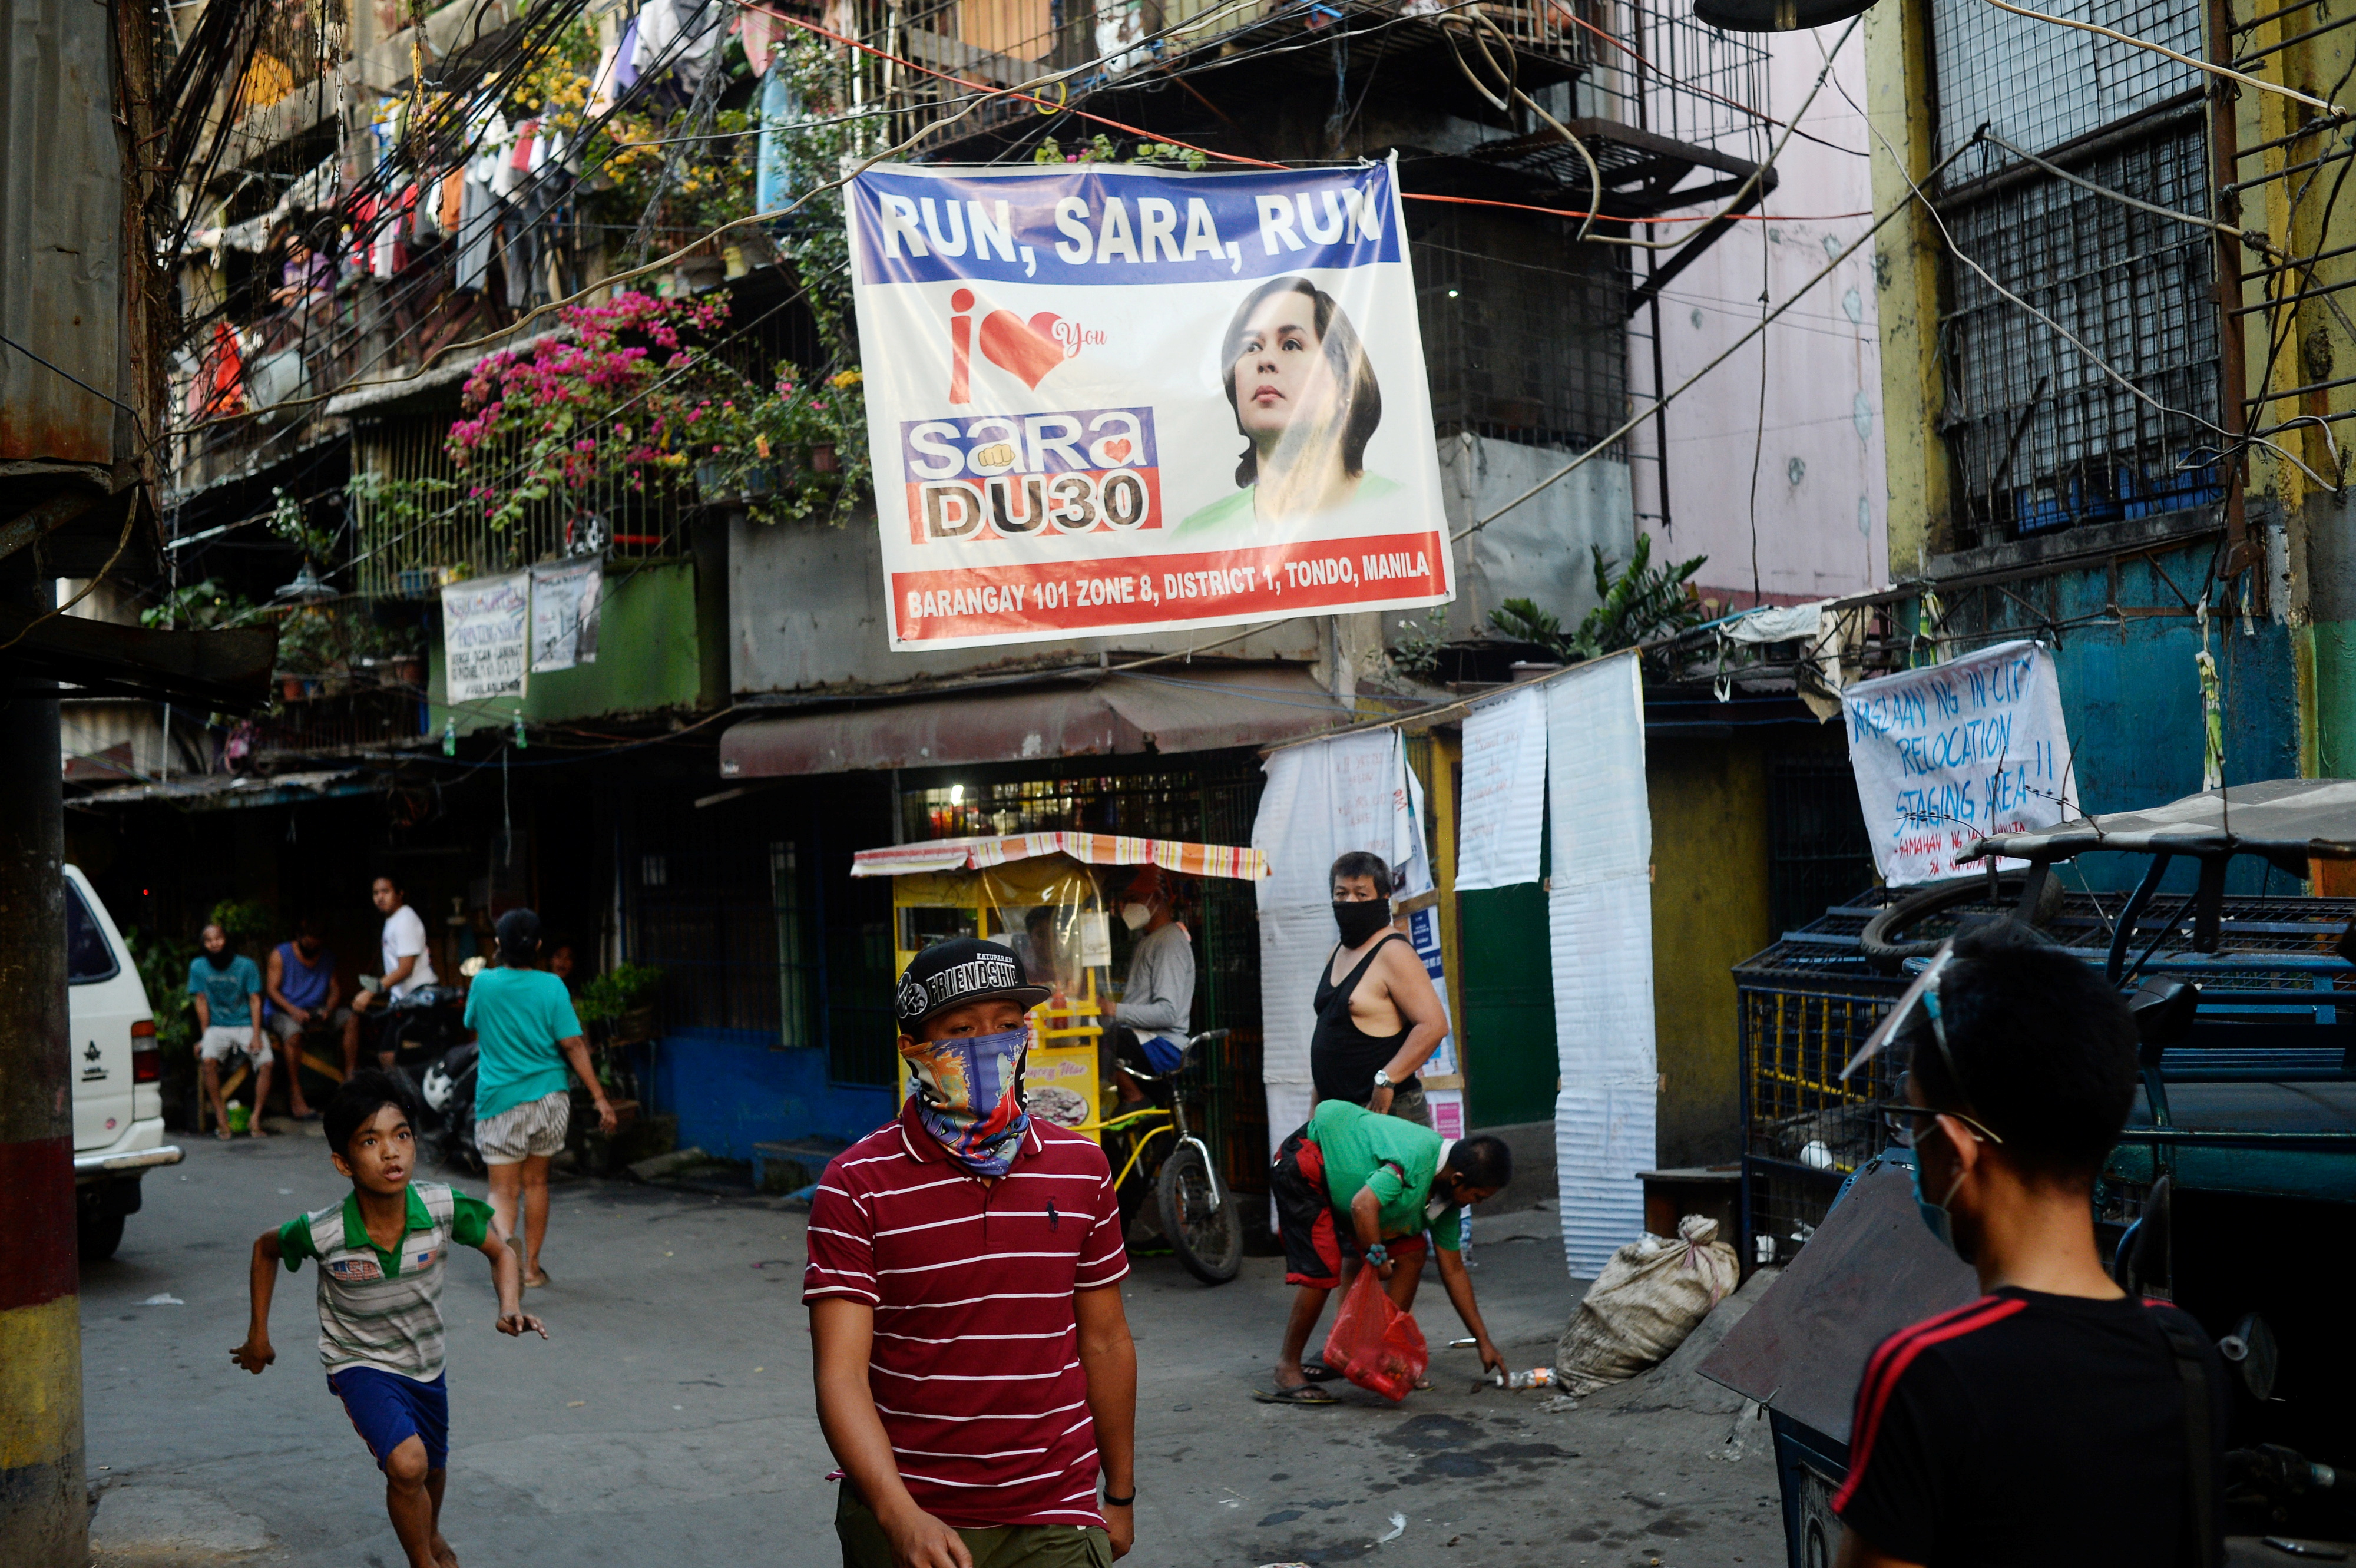 A banner showing support for Davao City Mayor Sara Duterte to run for president is seen in a community in Manila, Philippines